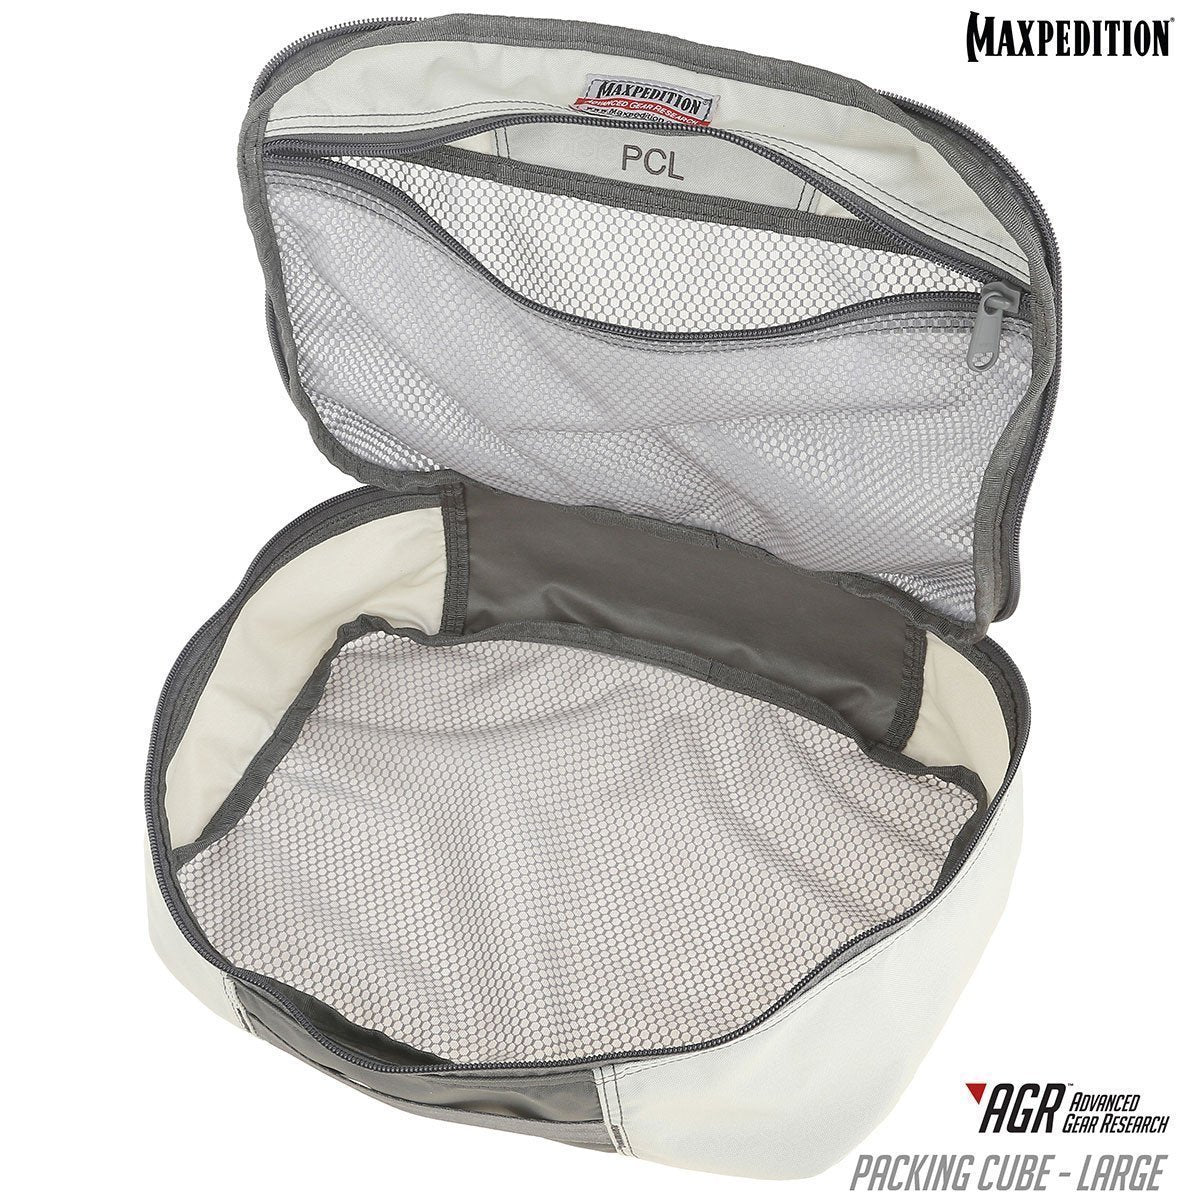 PCL™ Packing Cube Large | Maxpedition Tactical Gear